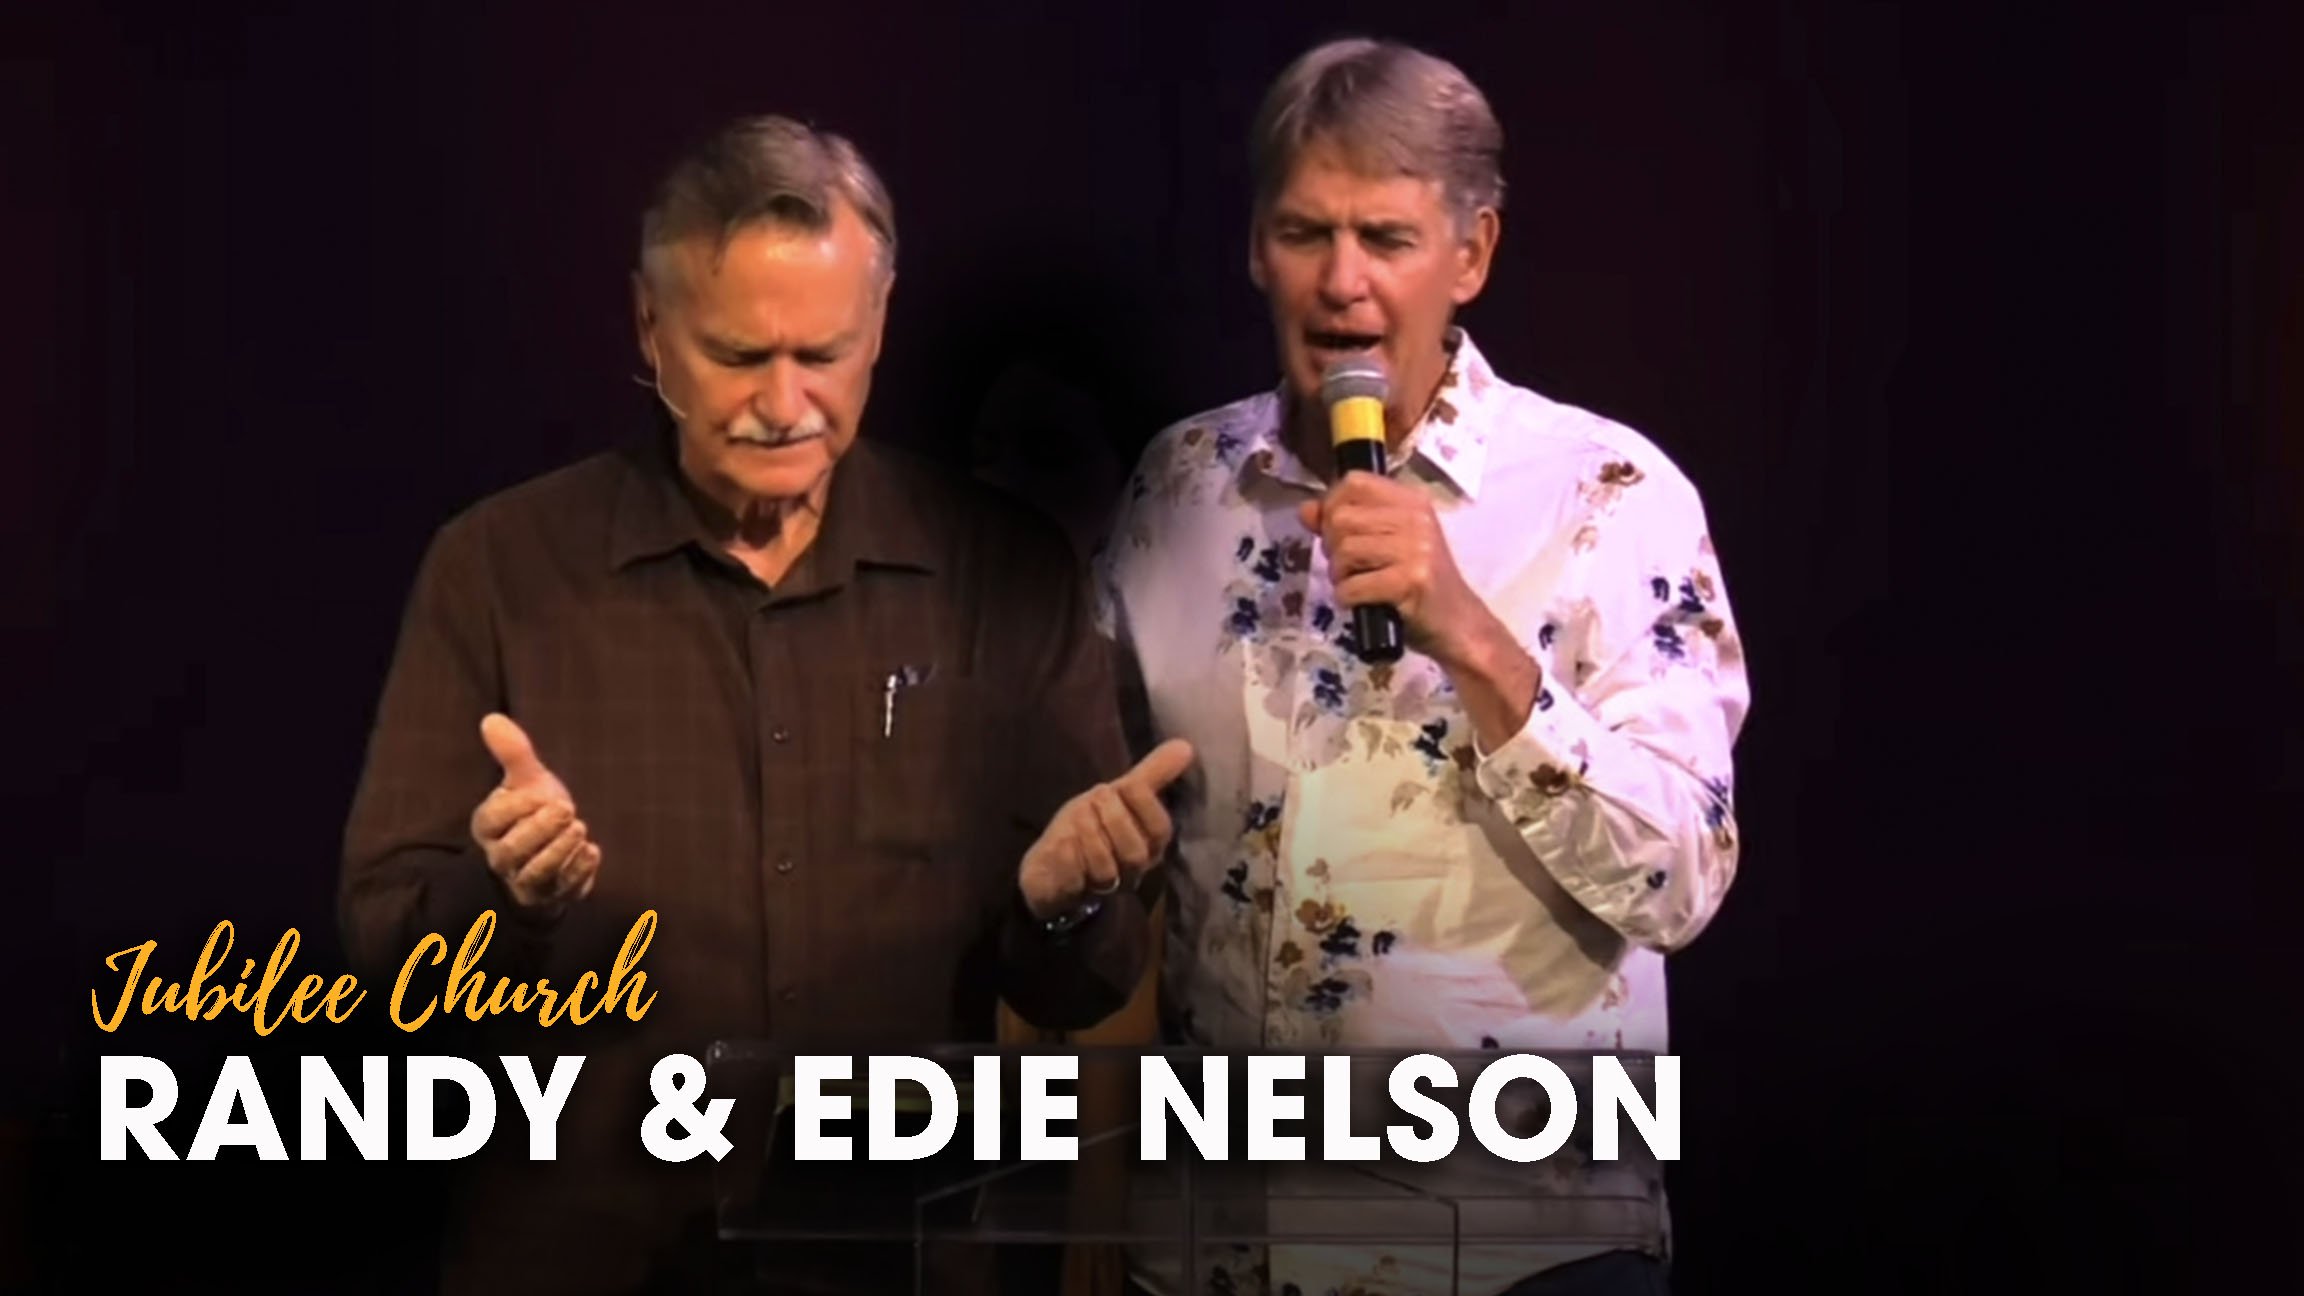 Randy and Edie Nelson